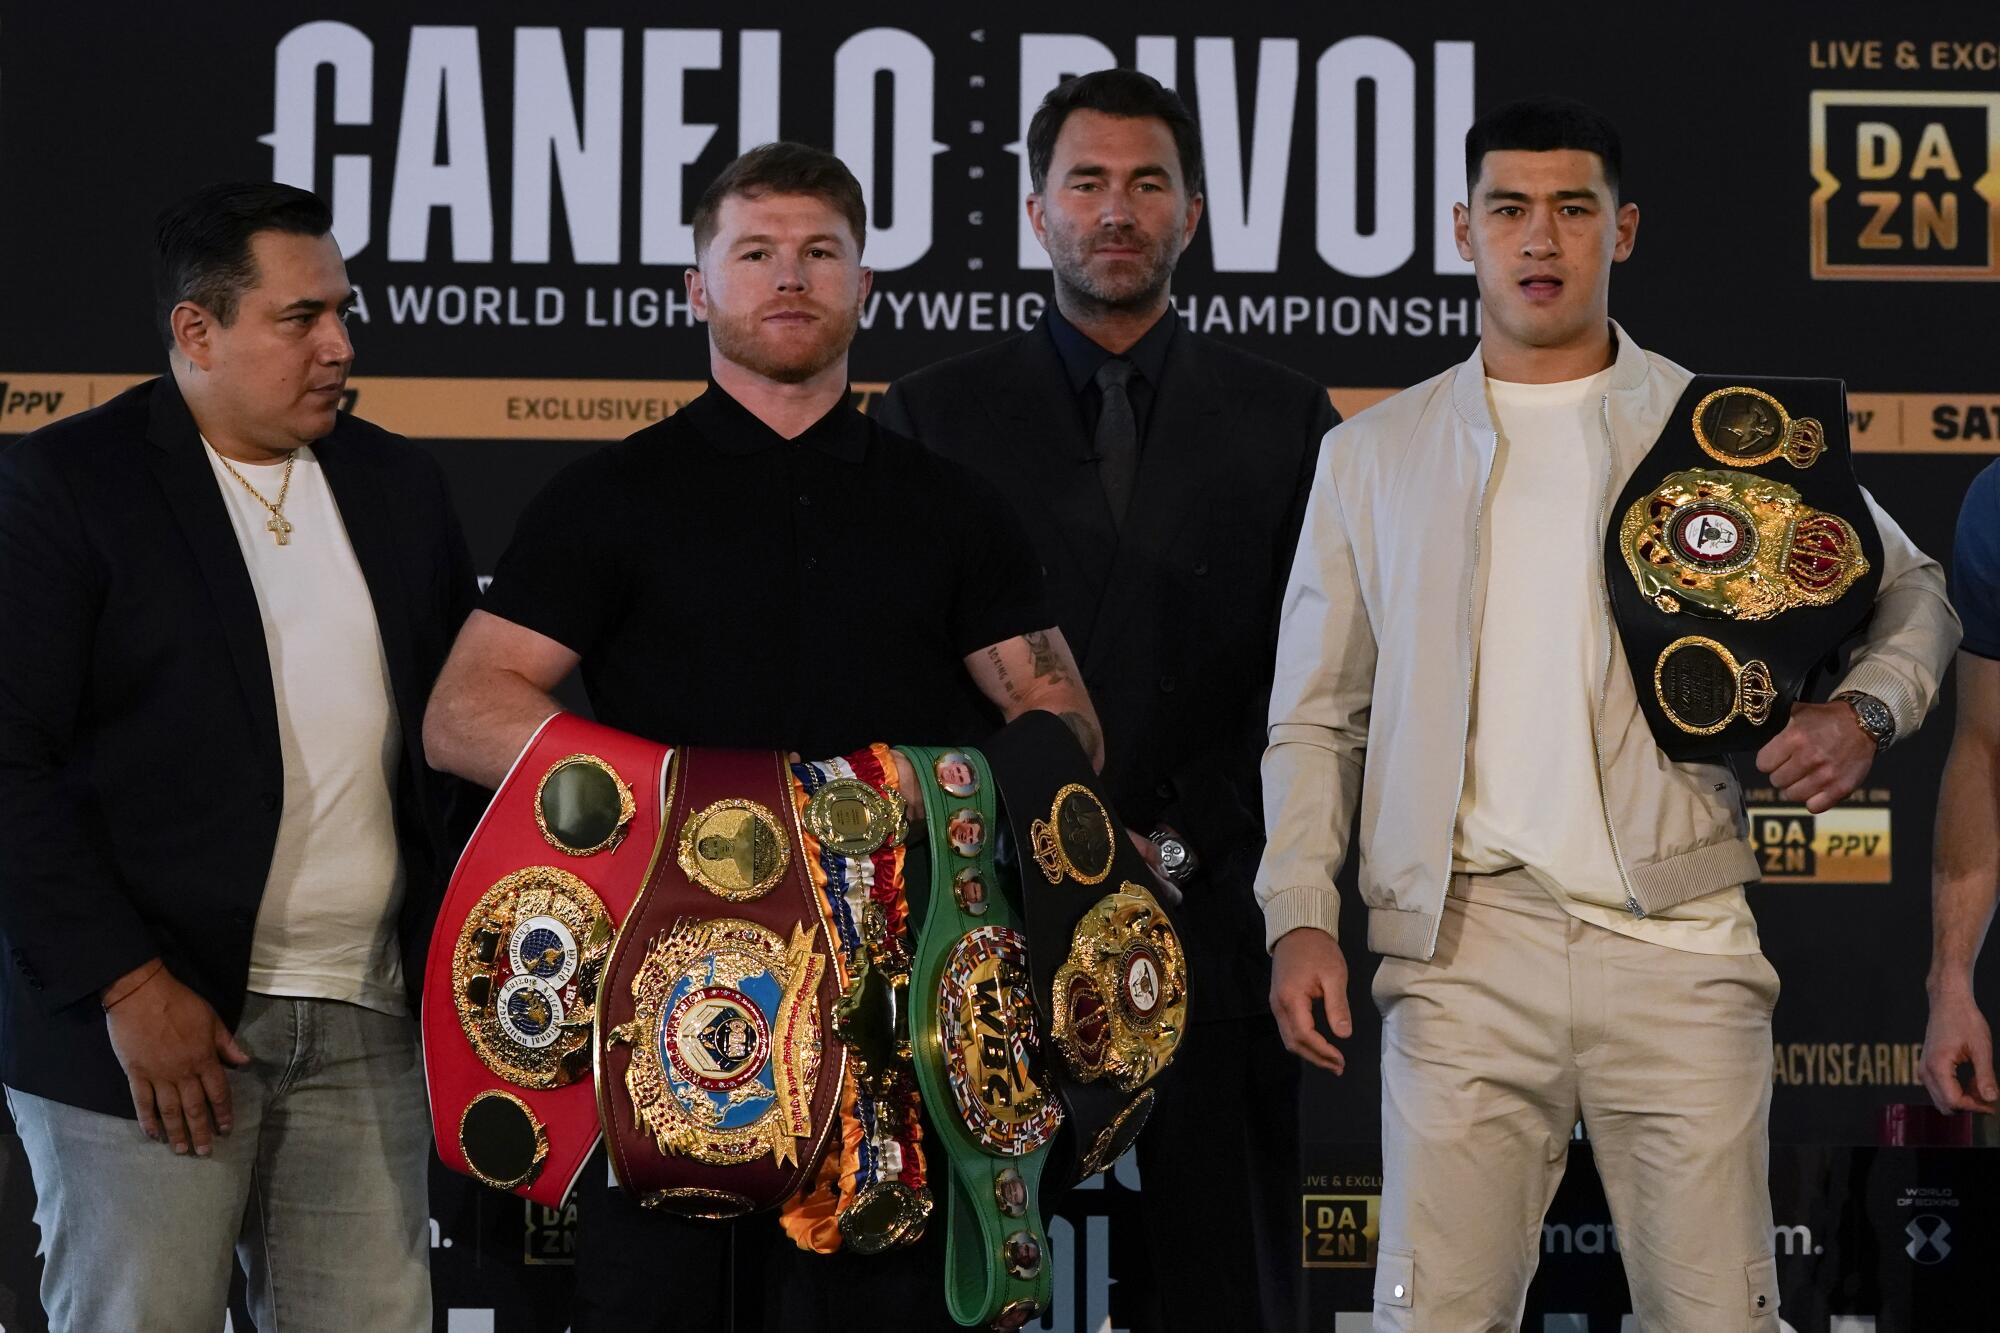 Canelo Alvarez, second from left, poses with Dmitry Bivol, right, during a news conference on March 2.